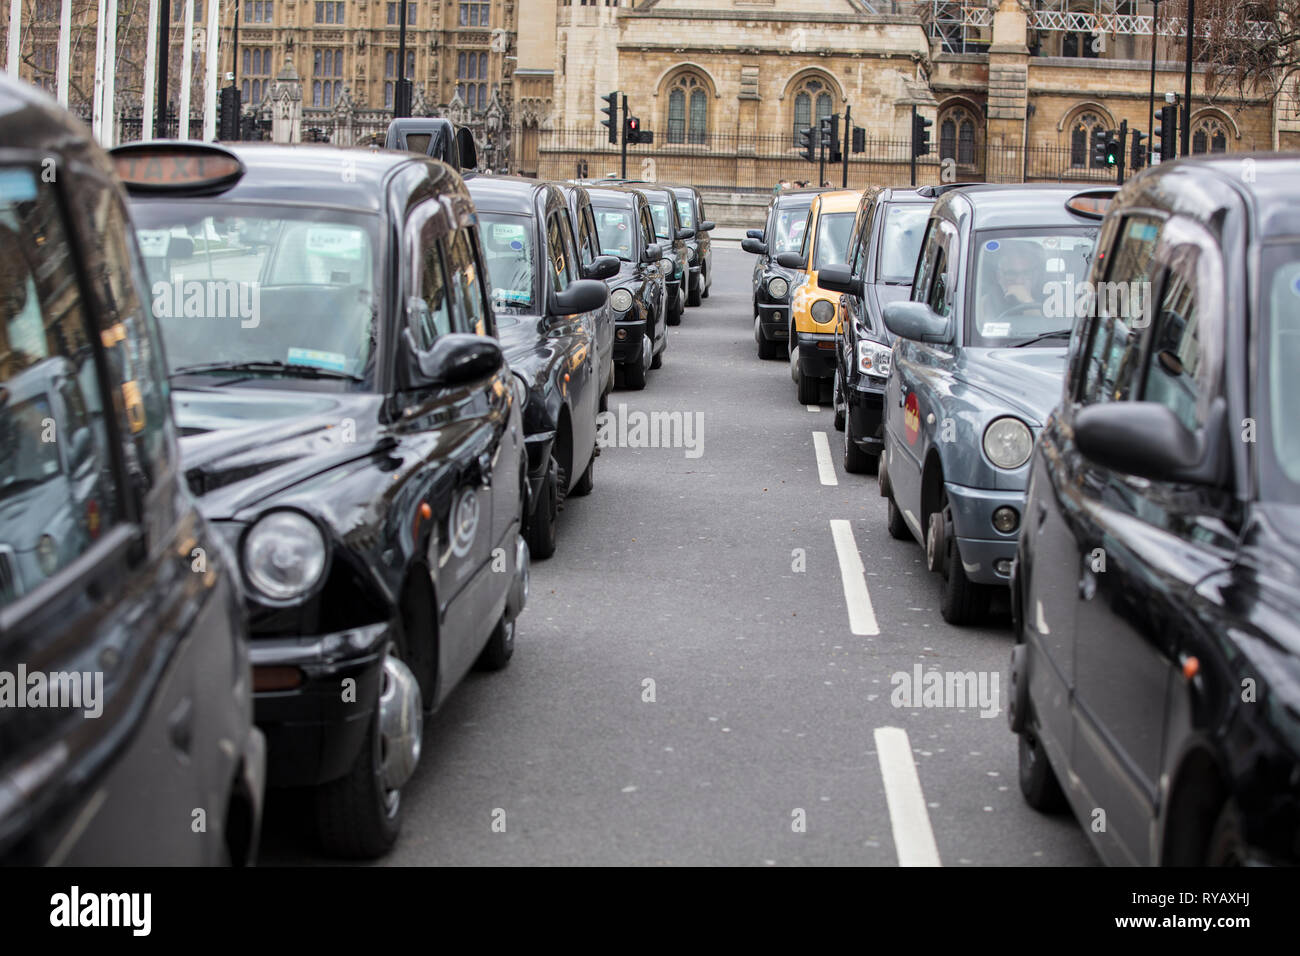 LONDON, UK - March 13th 2019: Black cabs block roads around Westminster in protest over plans to ban them driving on roads in parts of London Credit: Ink Drop/Alamy Live News Stock Photo